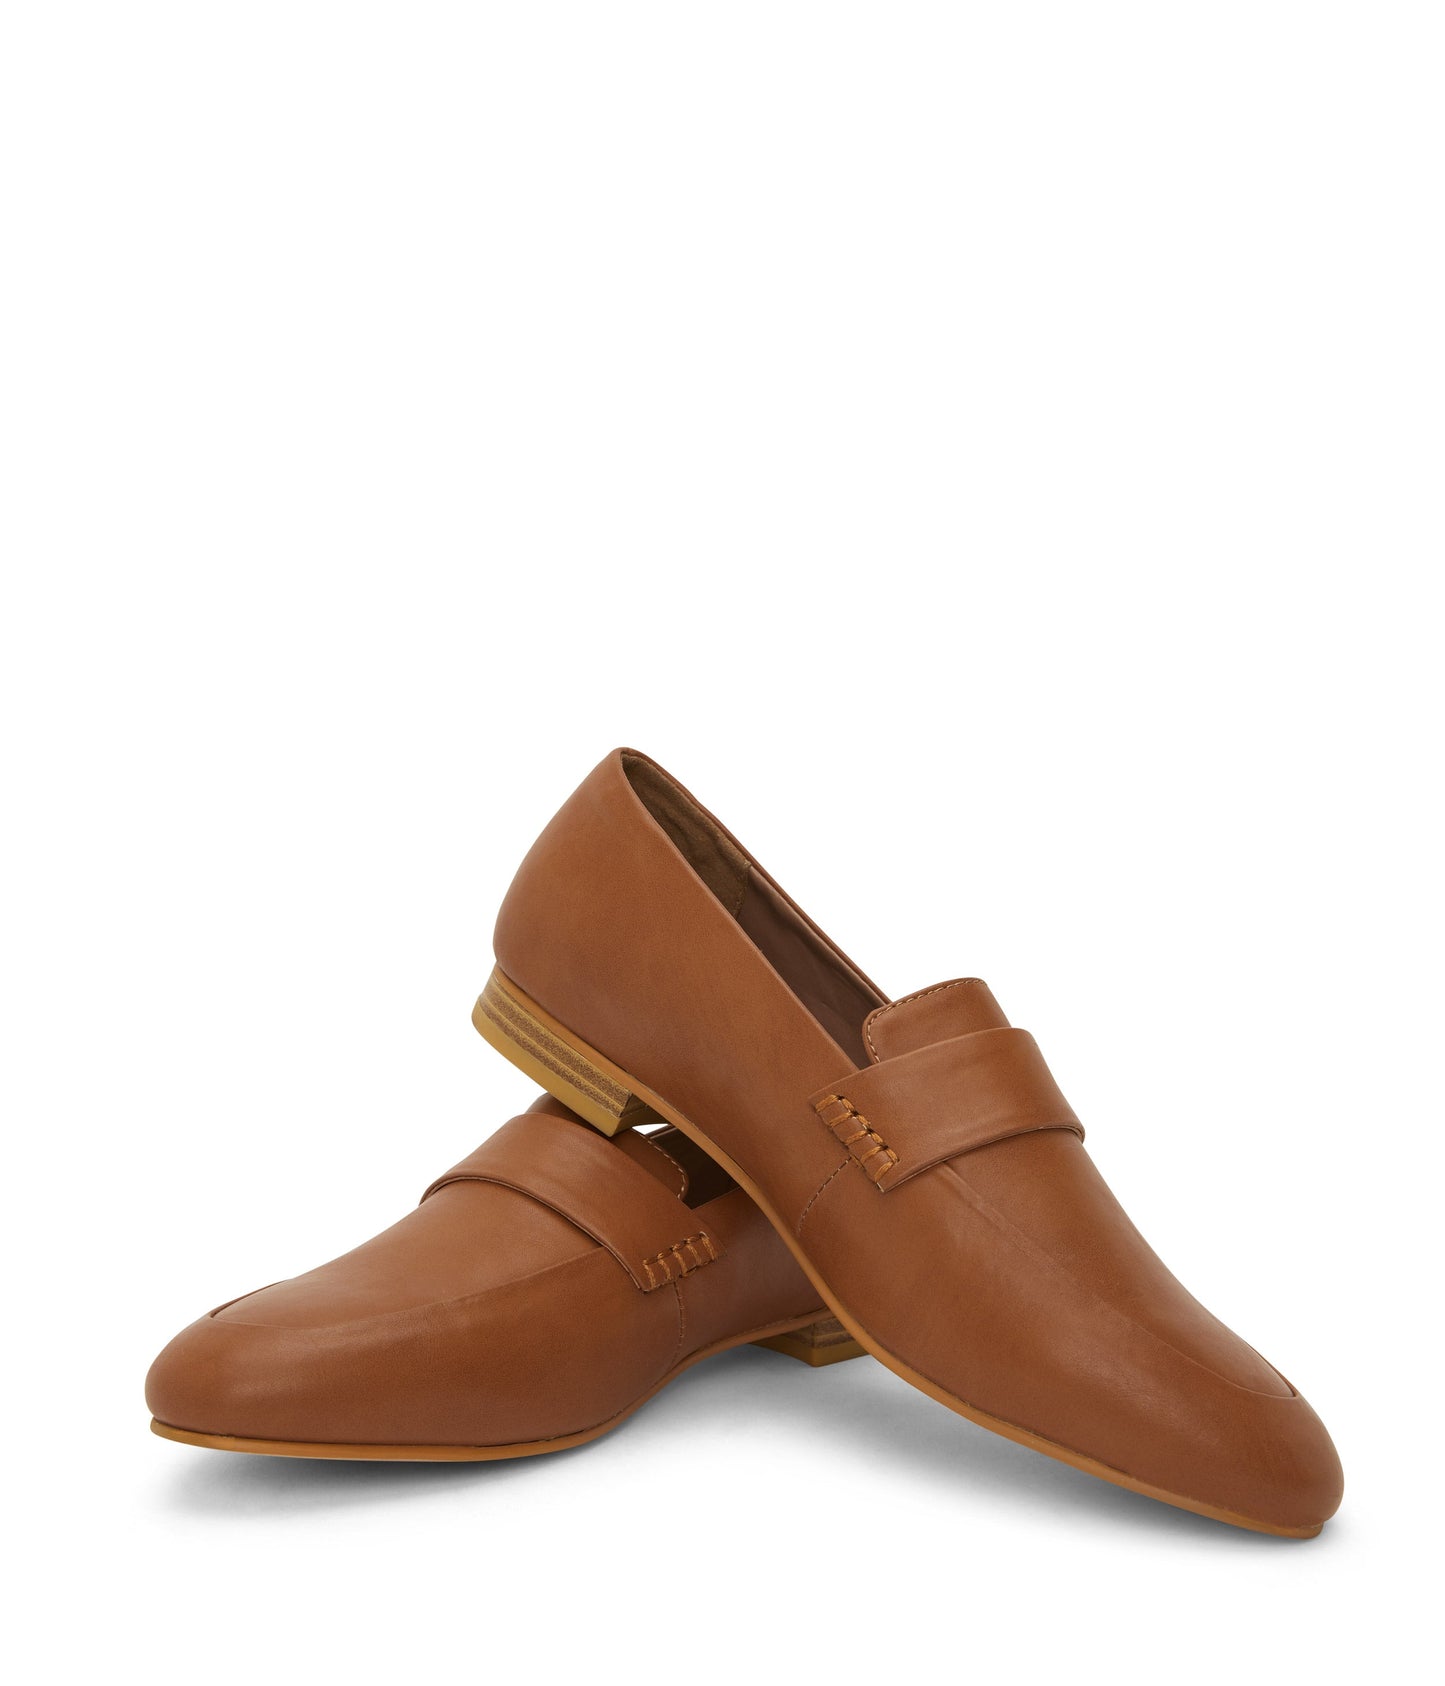 IVY Women's Vegan Loafers | Color: Brown - variant::chili